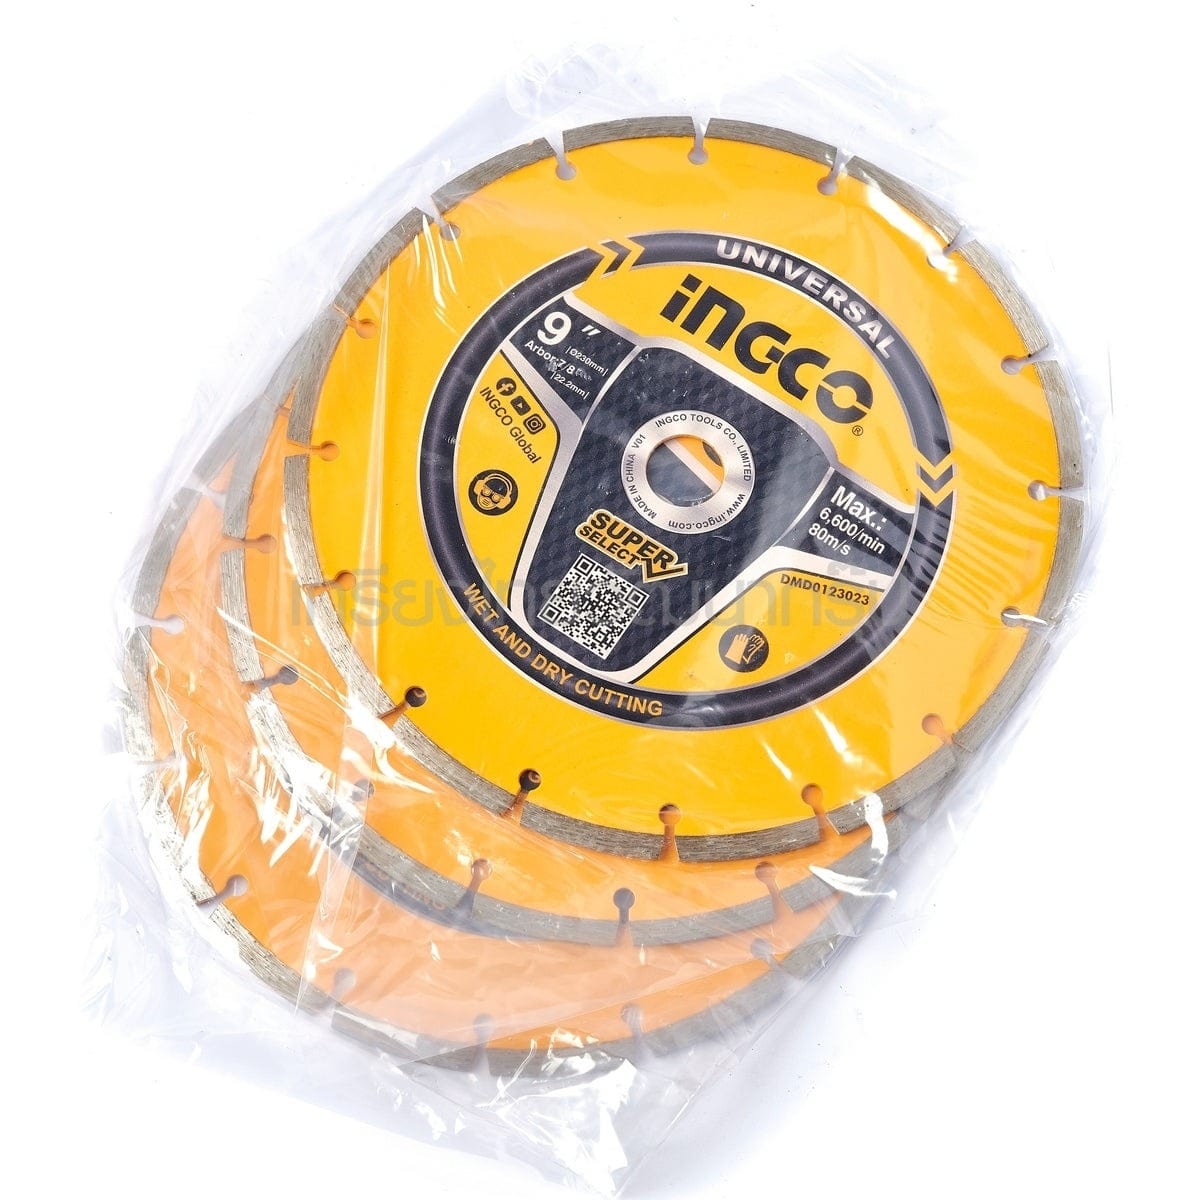 Ingco 3 Pieces 9" Dry Diamond Disc Set - DMD0123023 | Supply Master | Accra, Ghana Grinding & Cutting Wheels Buy Tools hardware Building materials